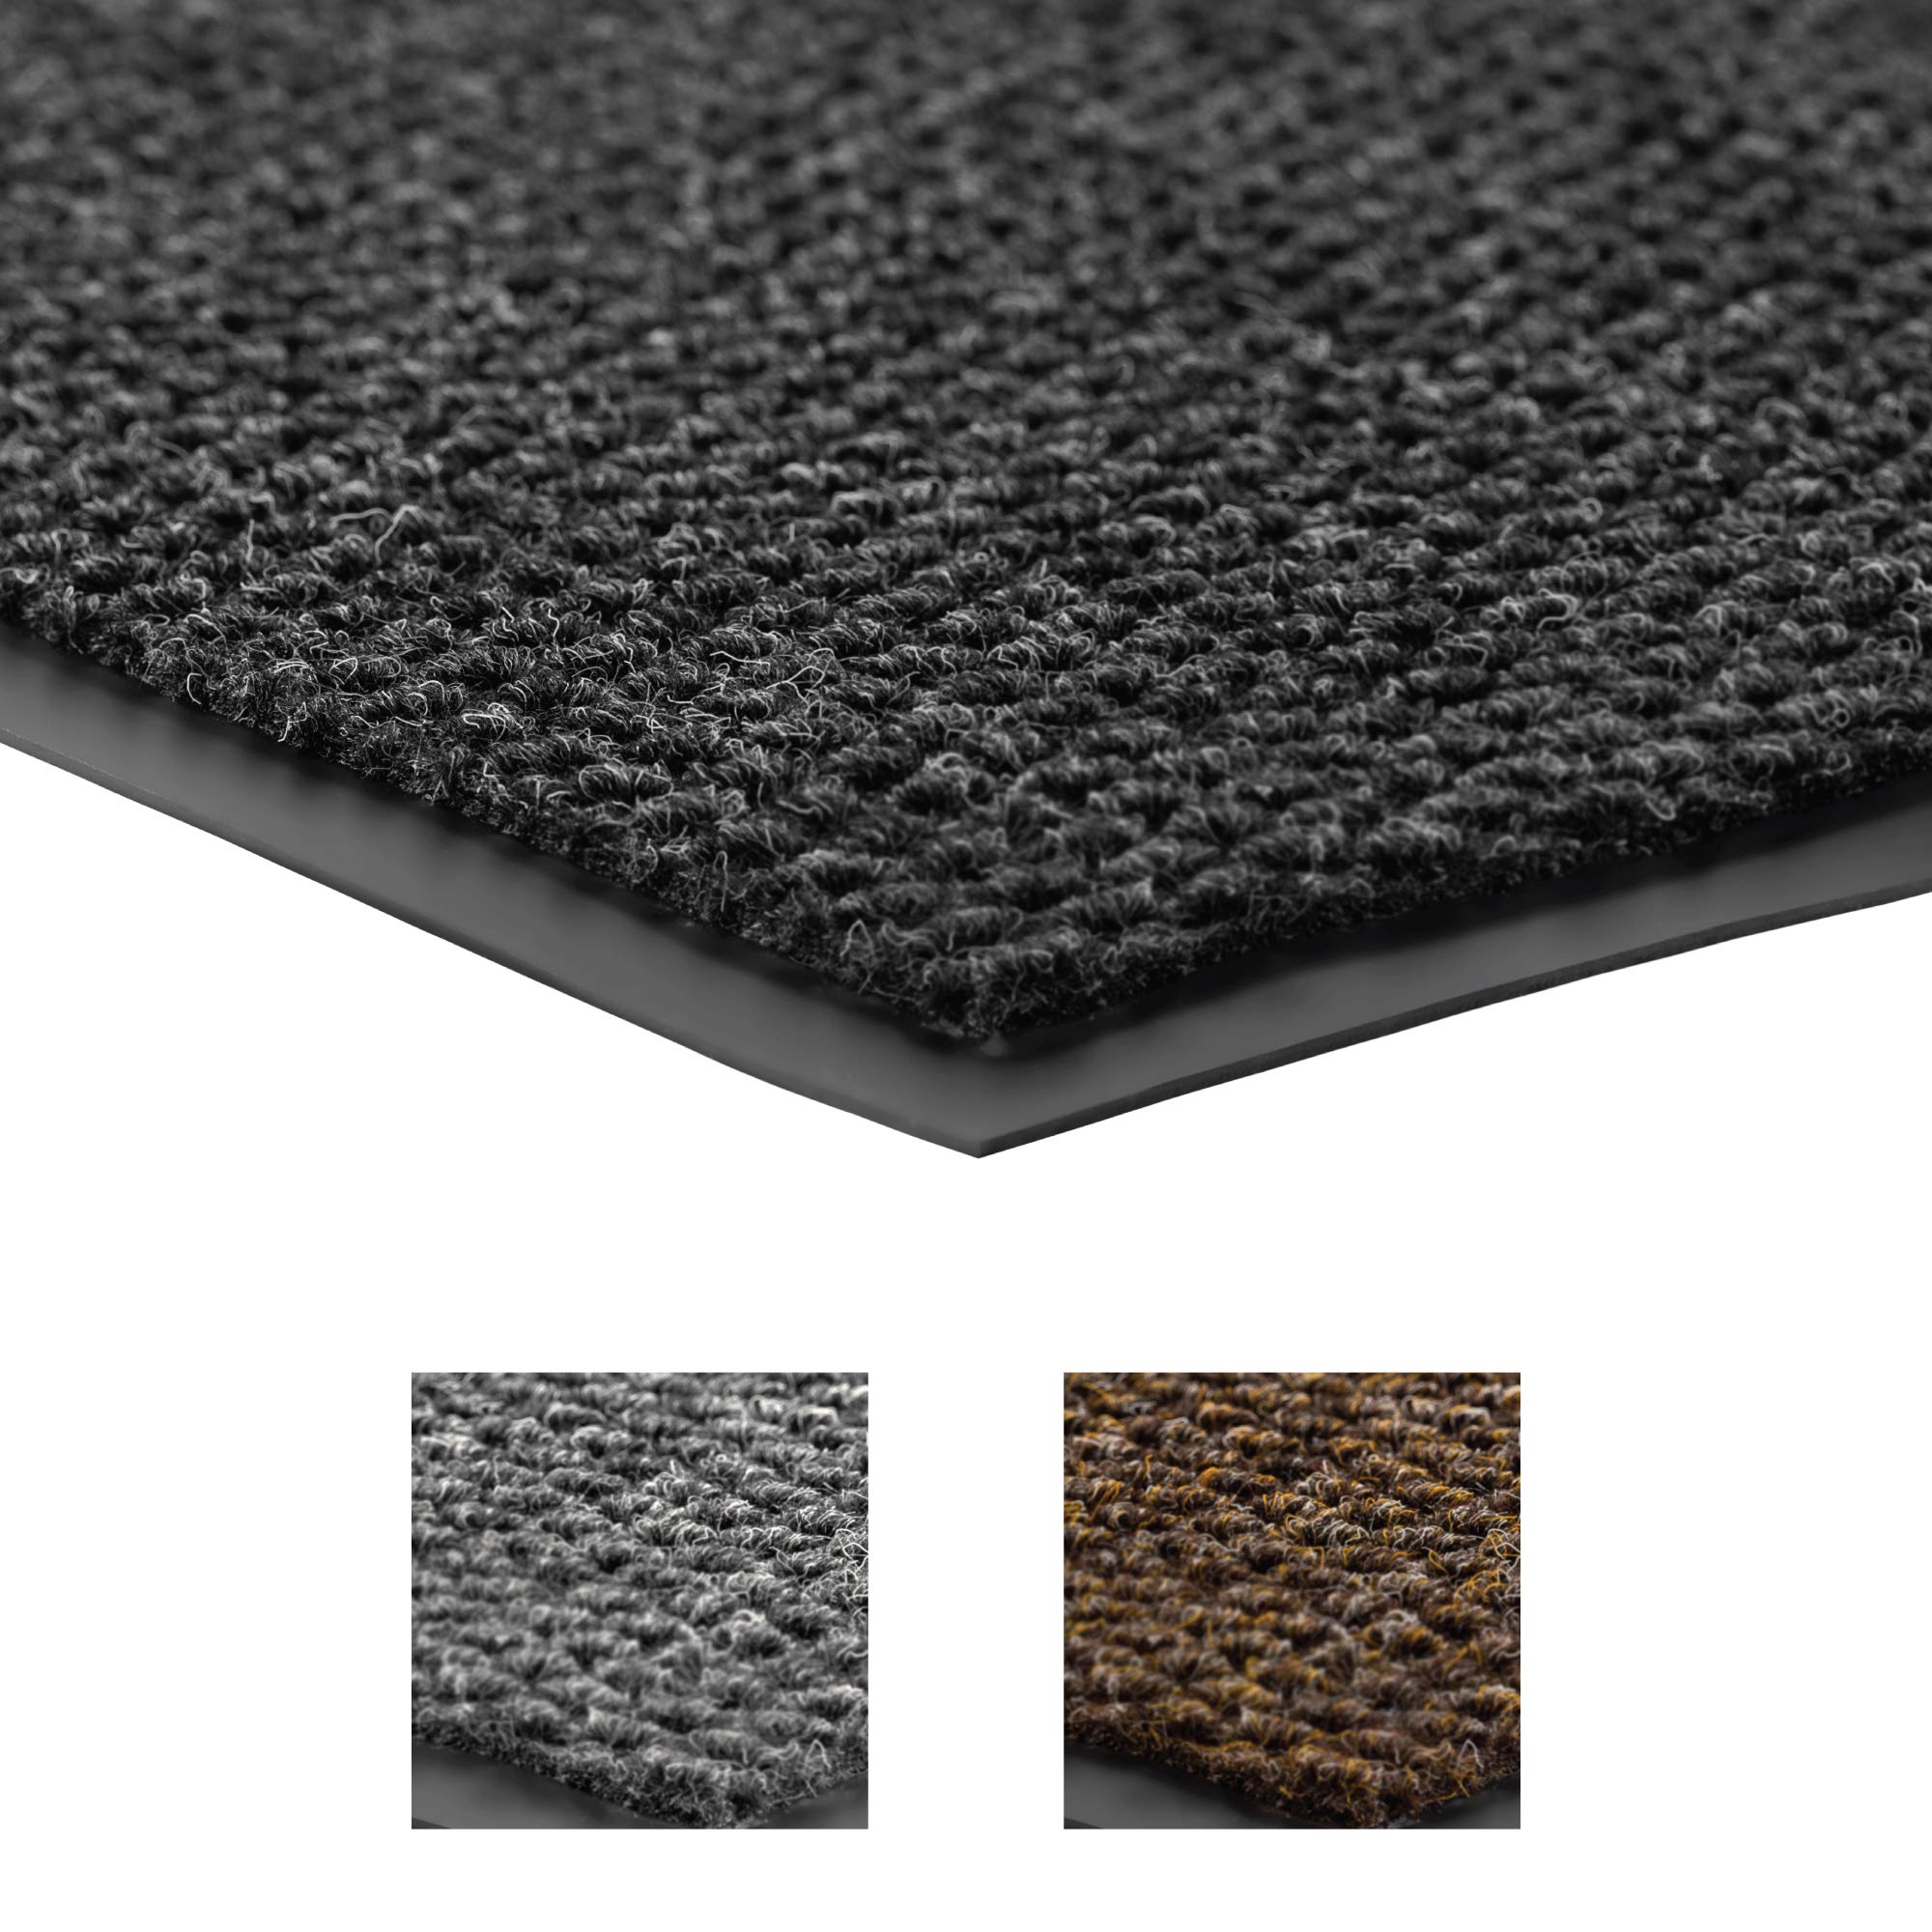 Notrax-136S0048 Carpeted Runner, Charcoal, 4Ft X 8Ft